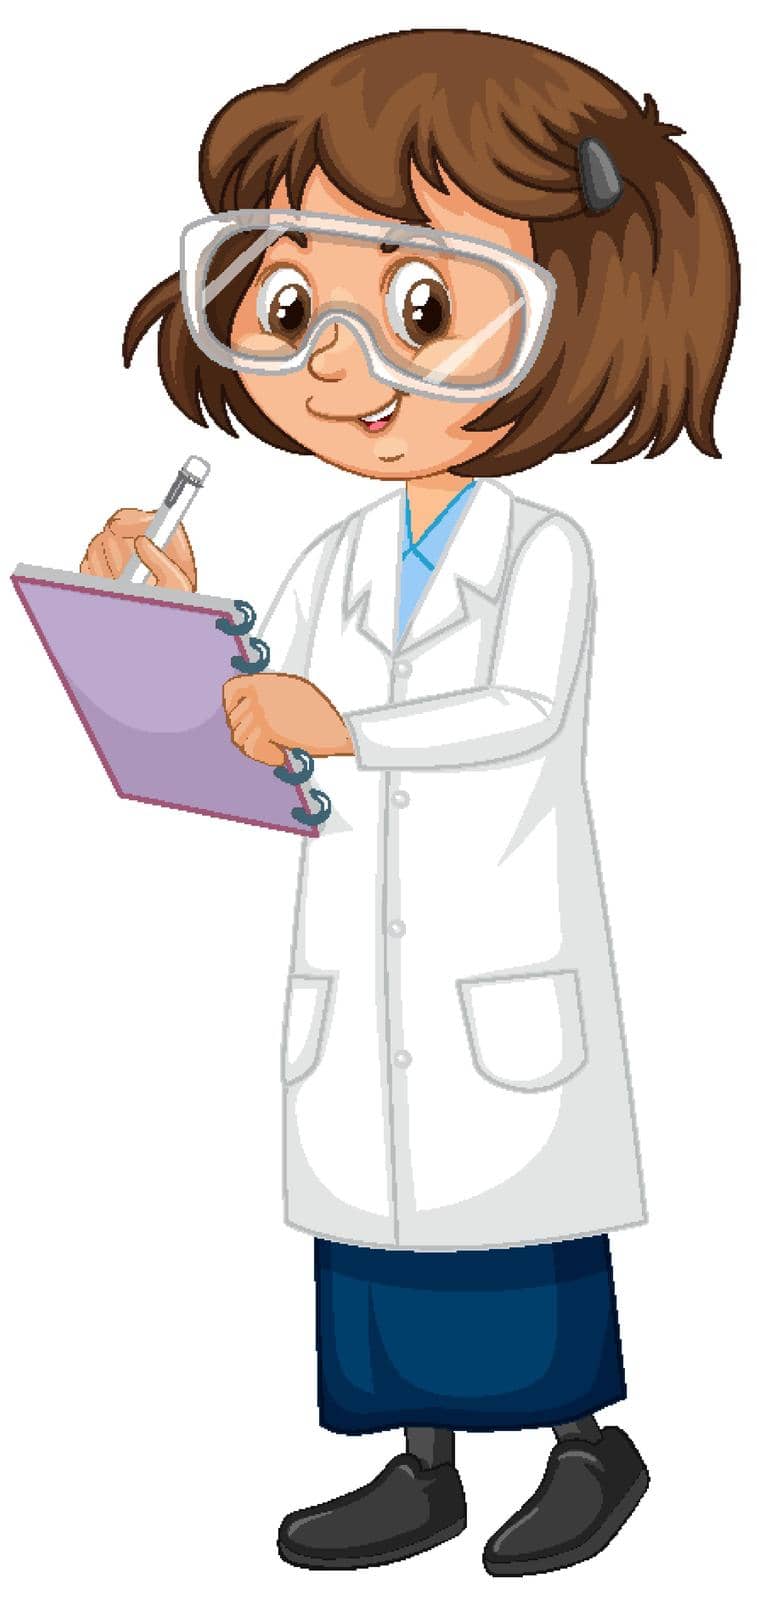 Girl in science gown on isolated background illustration